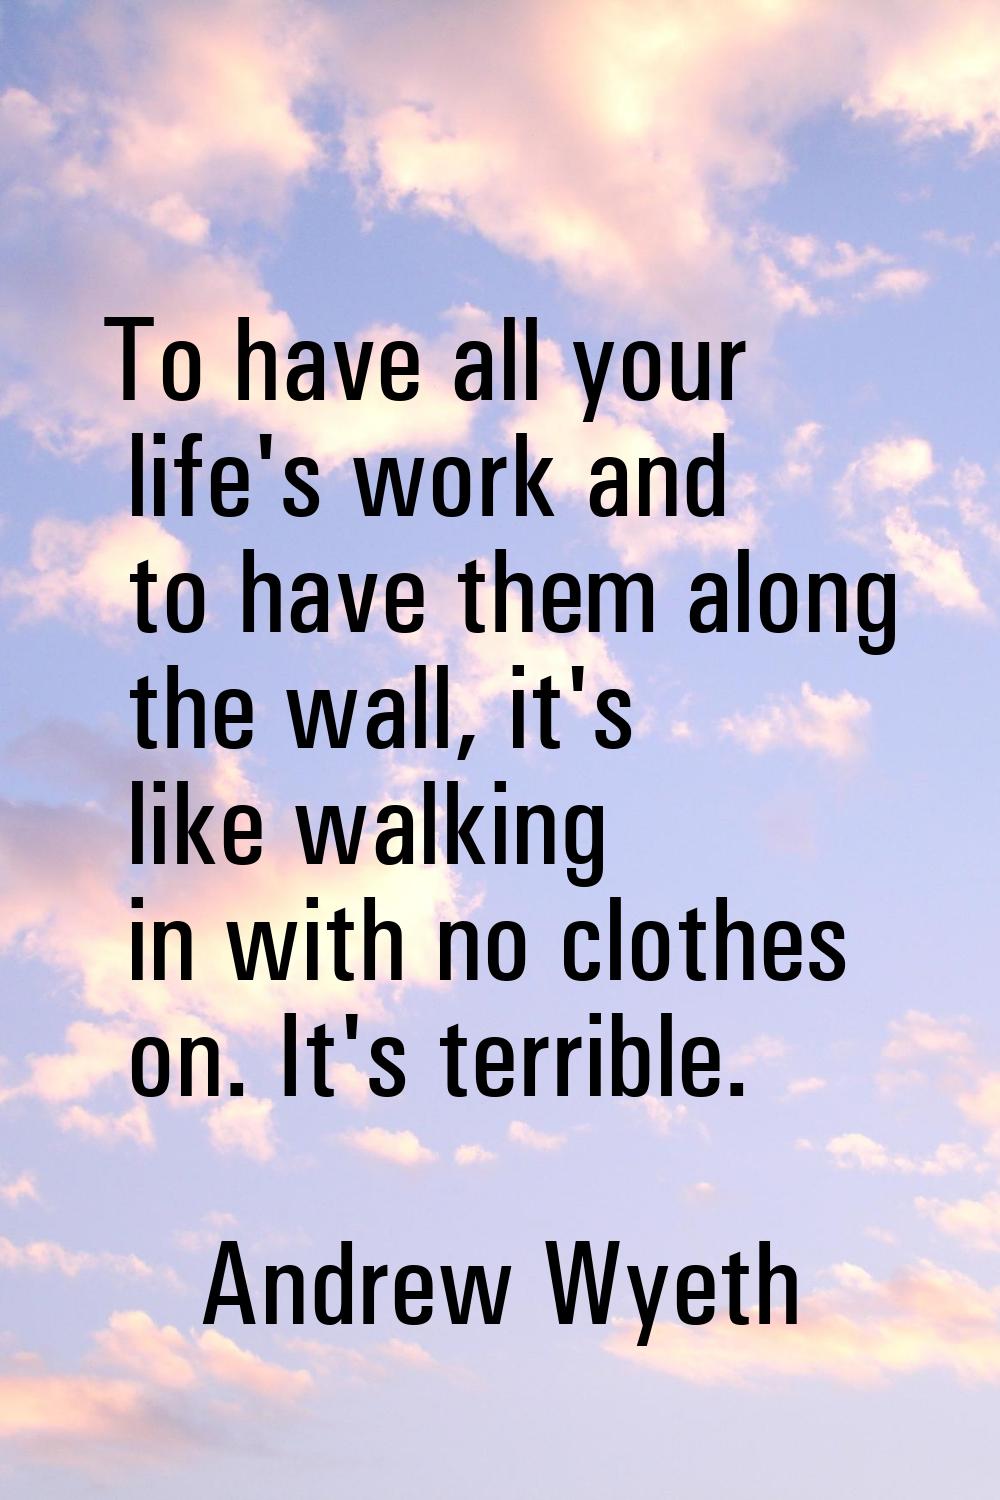 To have all your life's work and to have them along the wall, it's like walking in with no clothes 